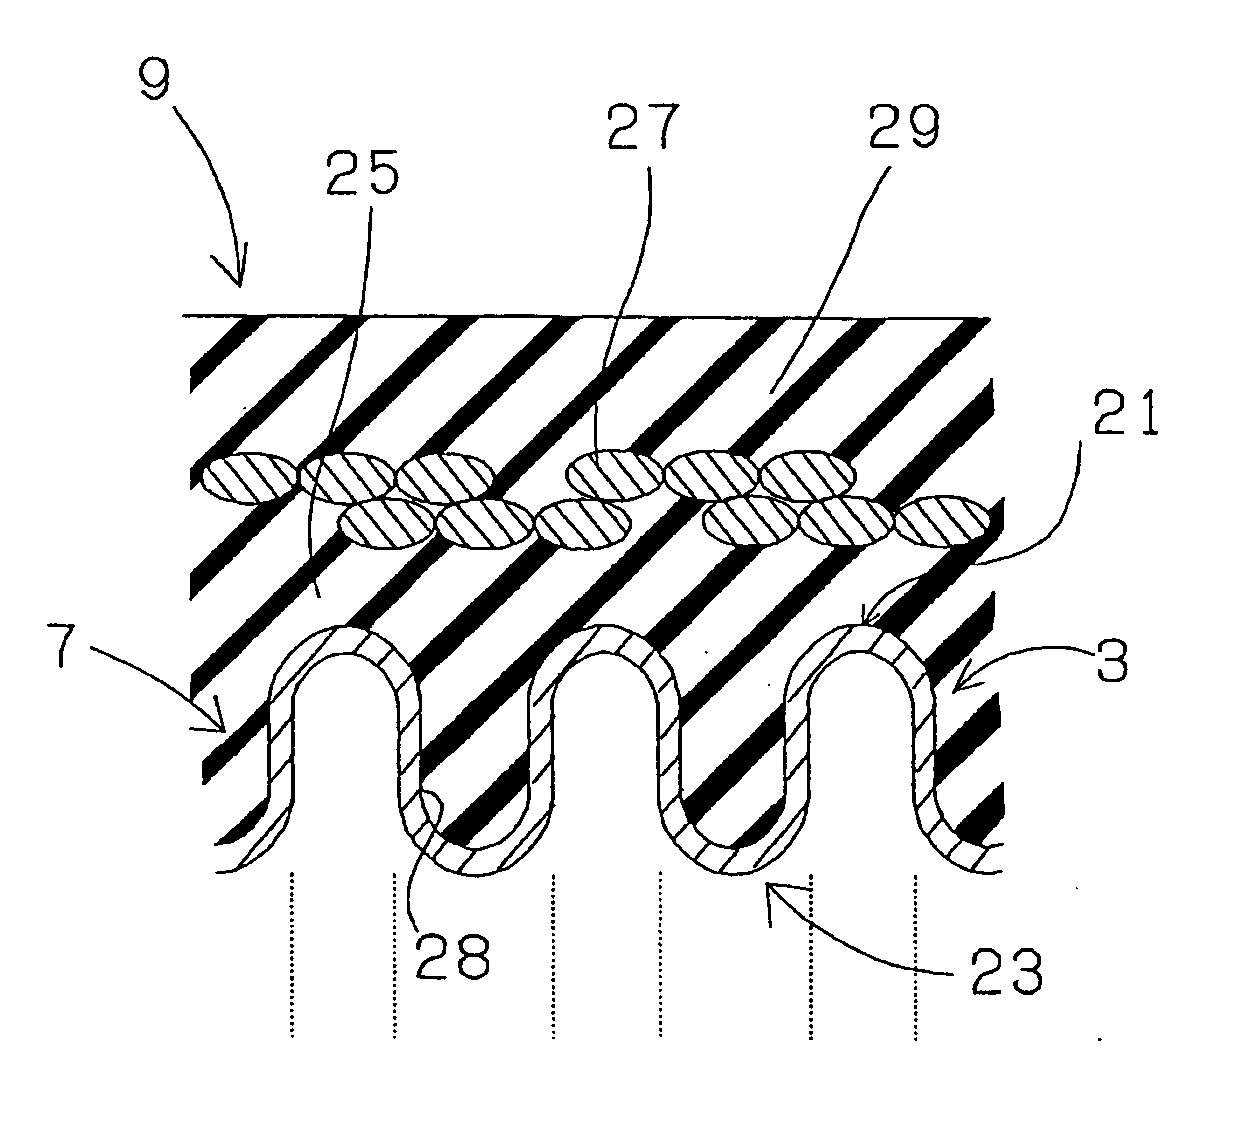 Composite hose with a corrugated metal tube and method for making the same